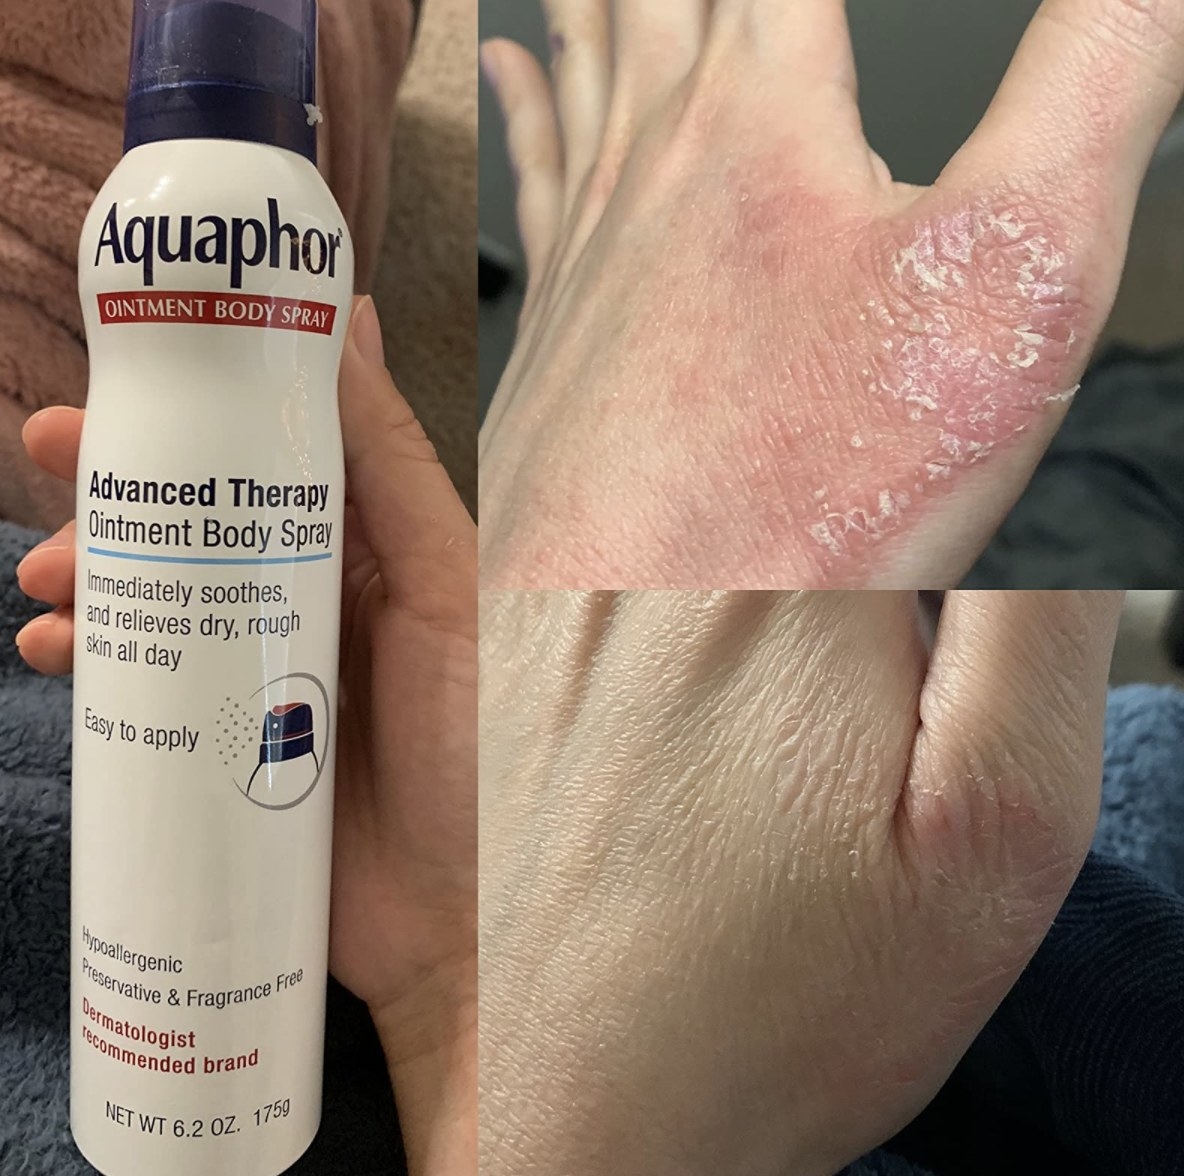 reviewer holding the bottle of Aquaphor spray next to a before-and-after image showing how it has healed their dry skin